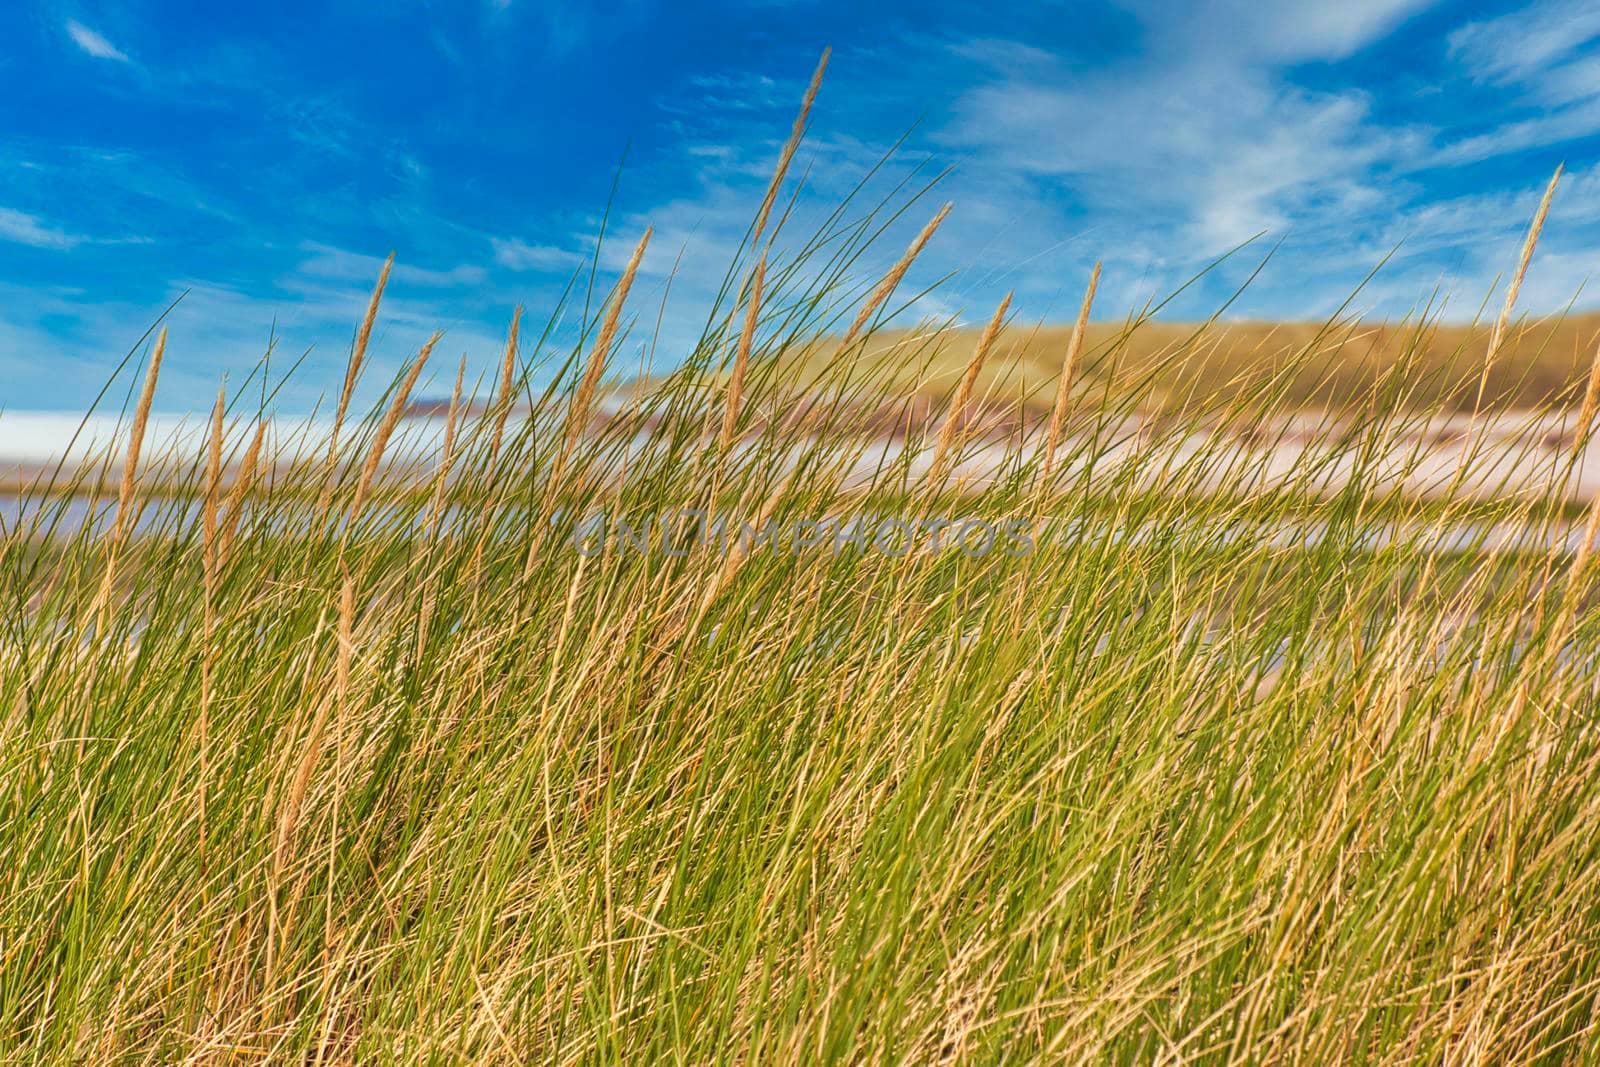 Island of Texel - Netherlands - plat on a dune with blue sky - no people